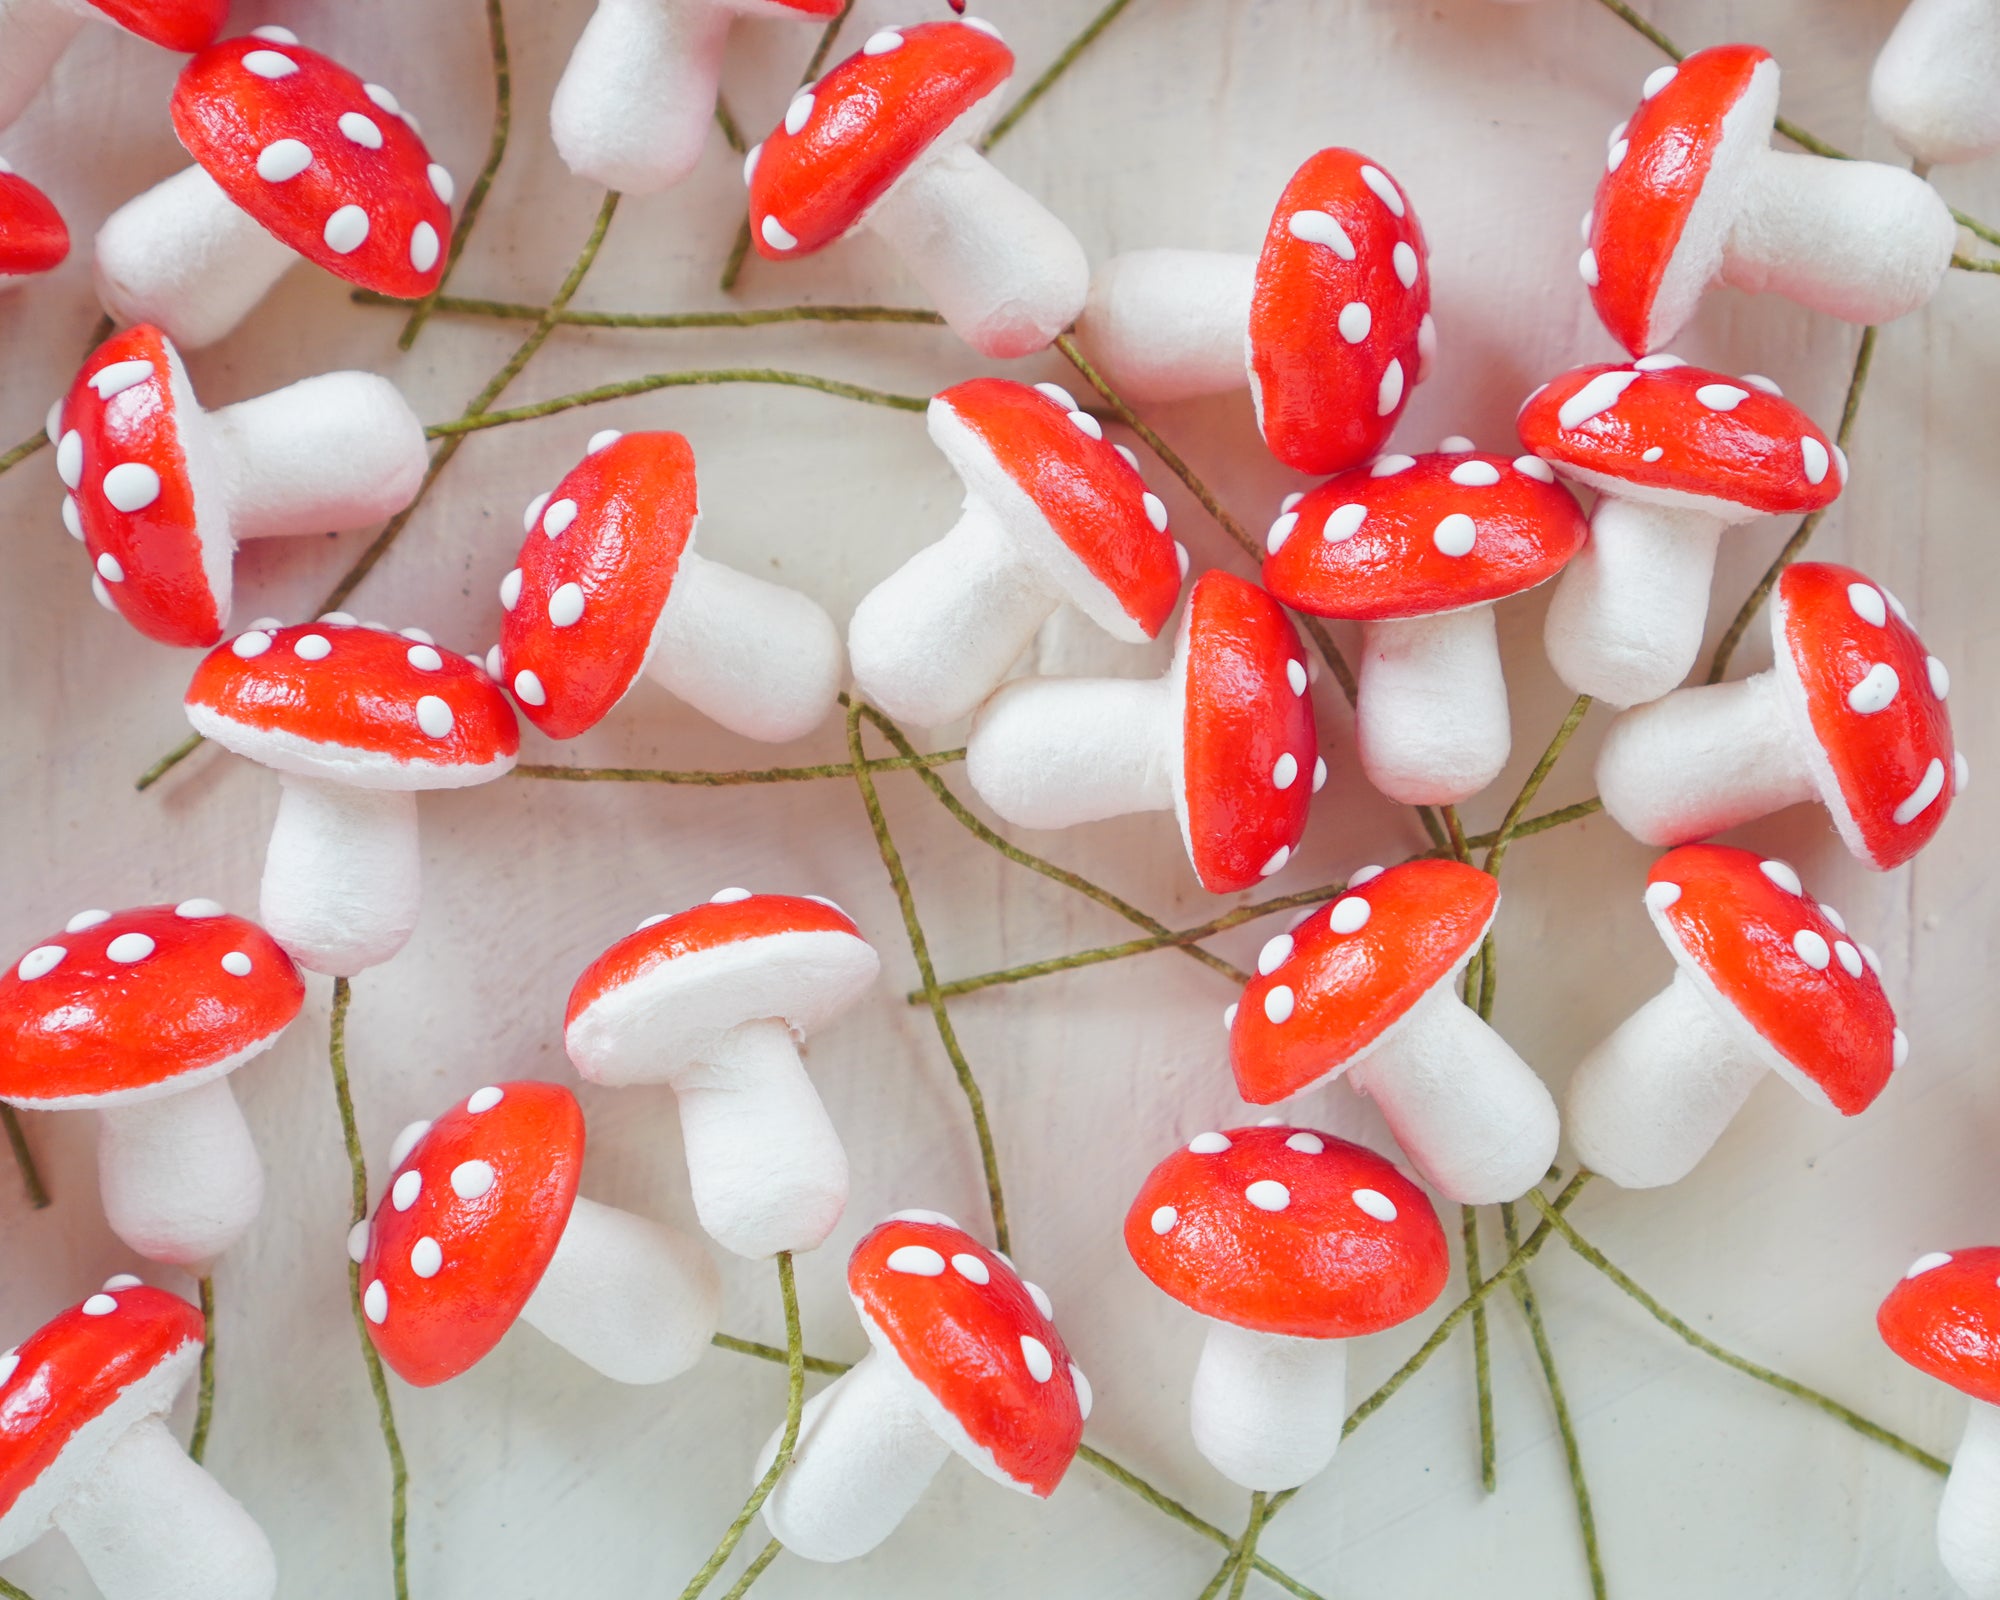 30 Mushroom beads red white polymer clay L428